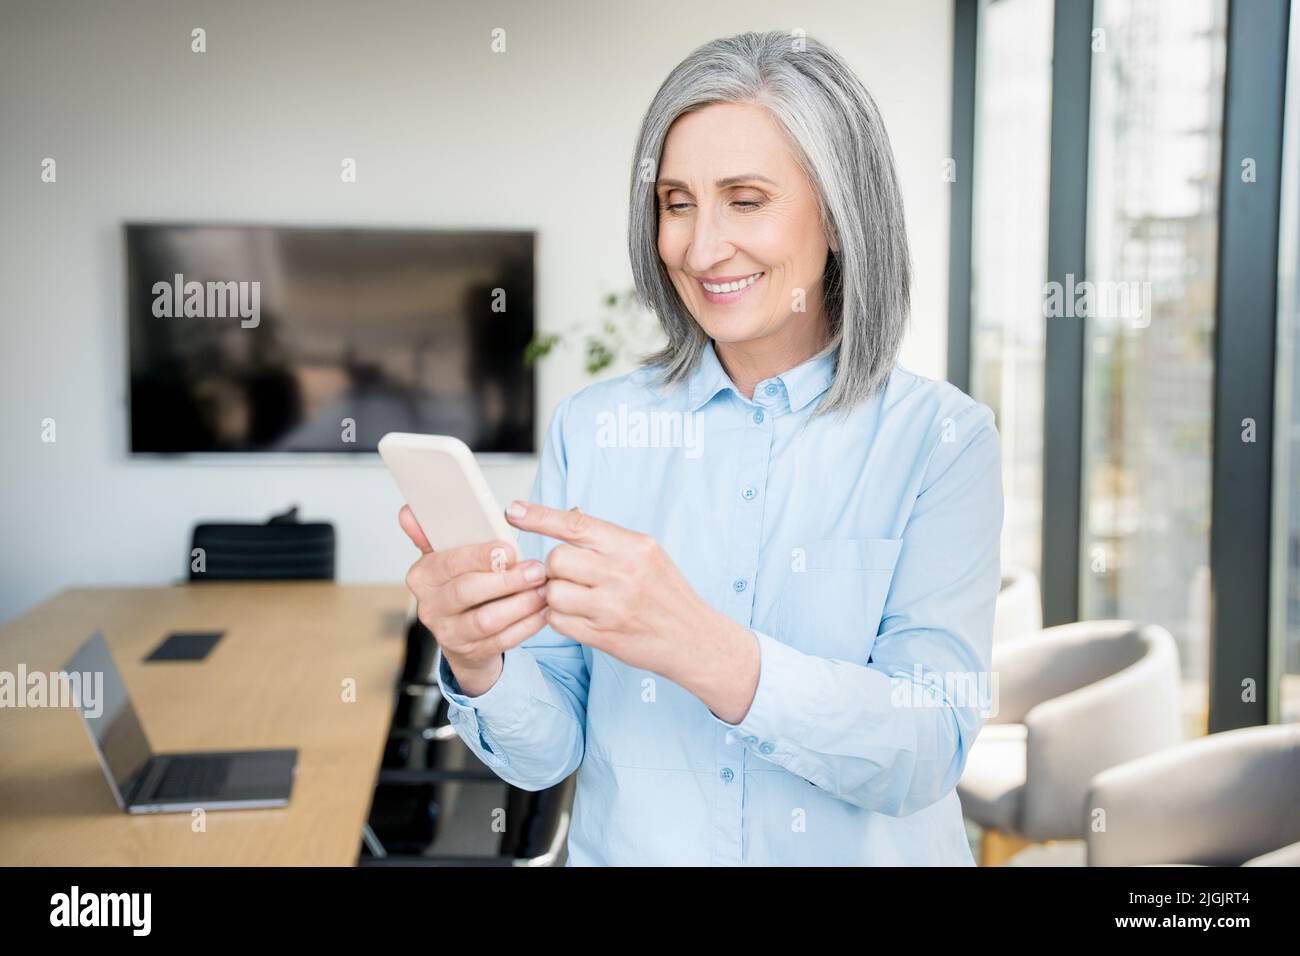 Gray-haired senior businesswoman is using a smartphone in an office. Stock Photo